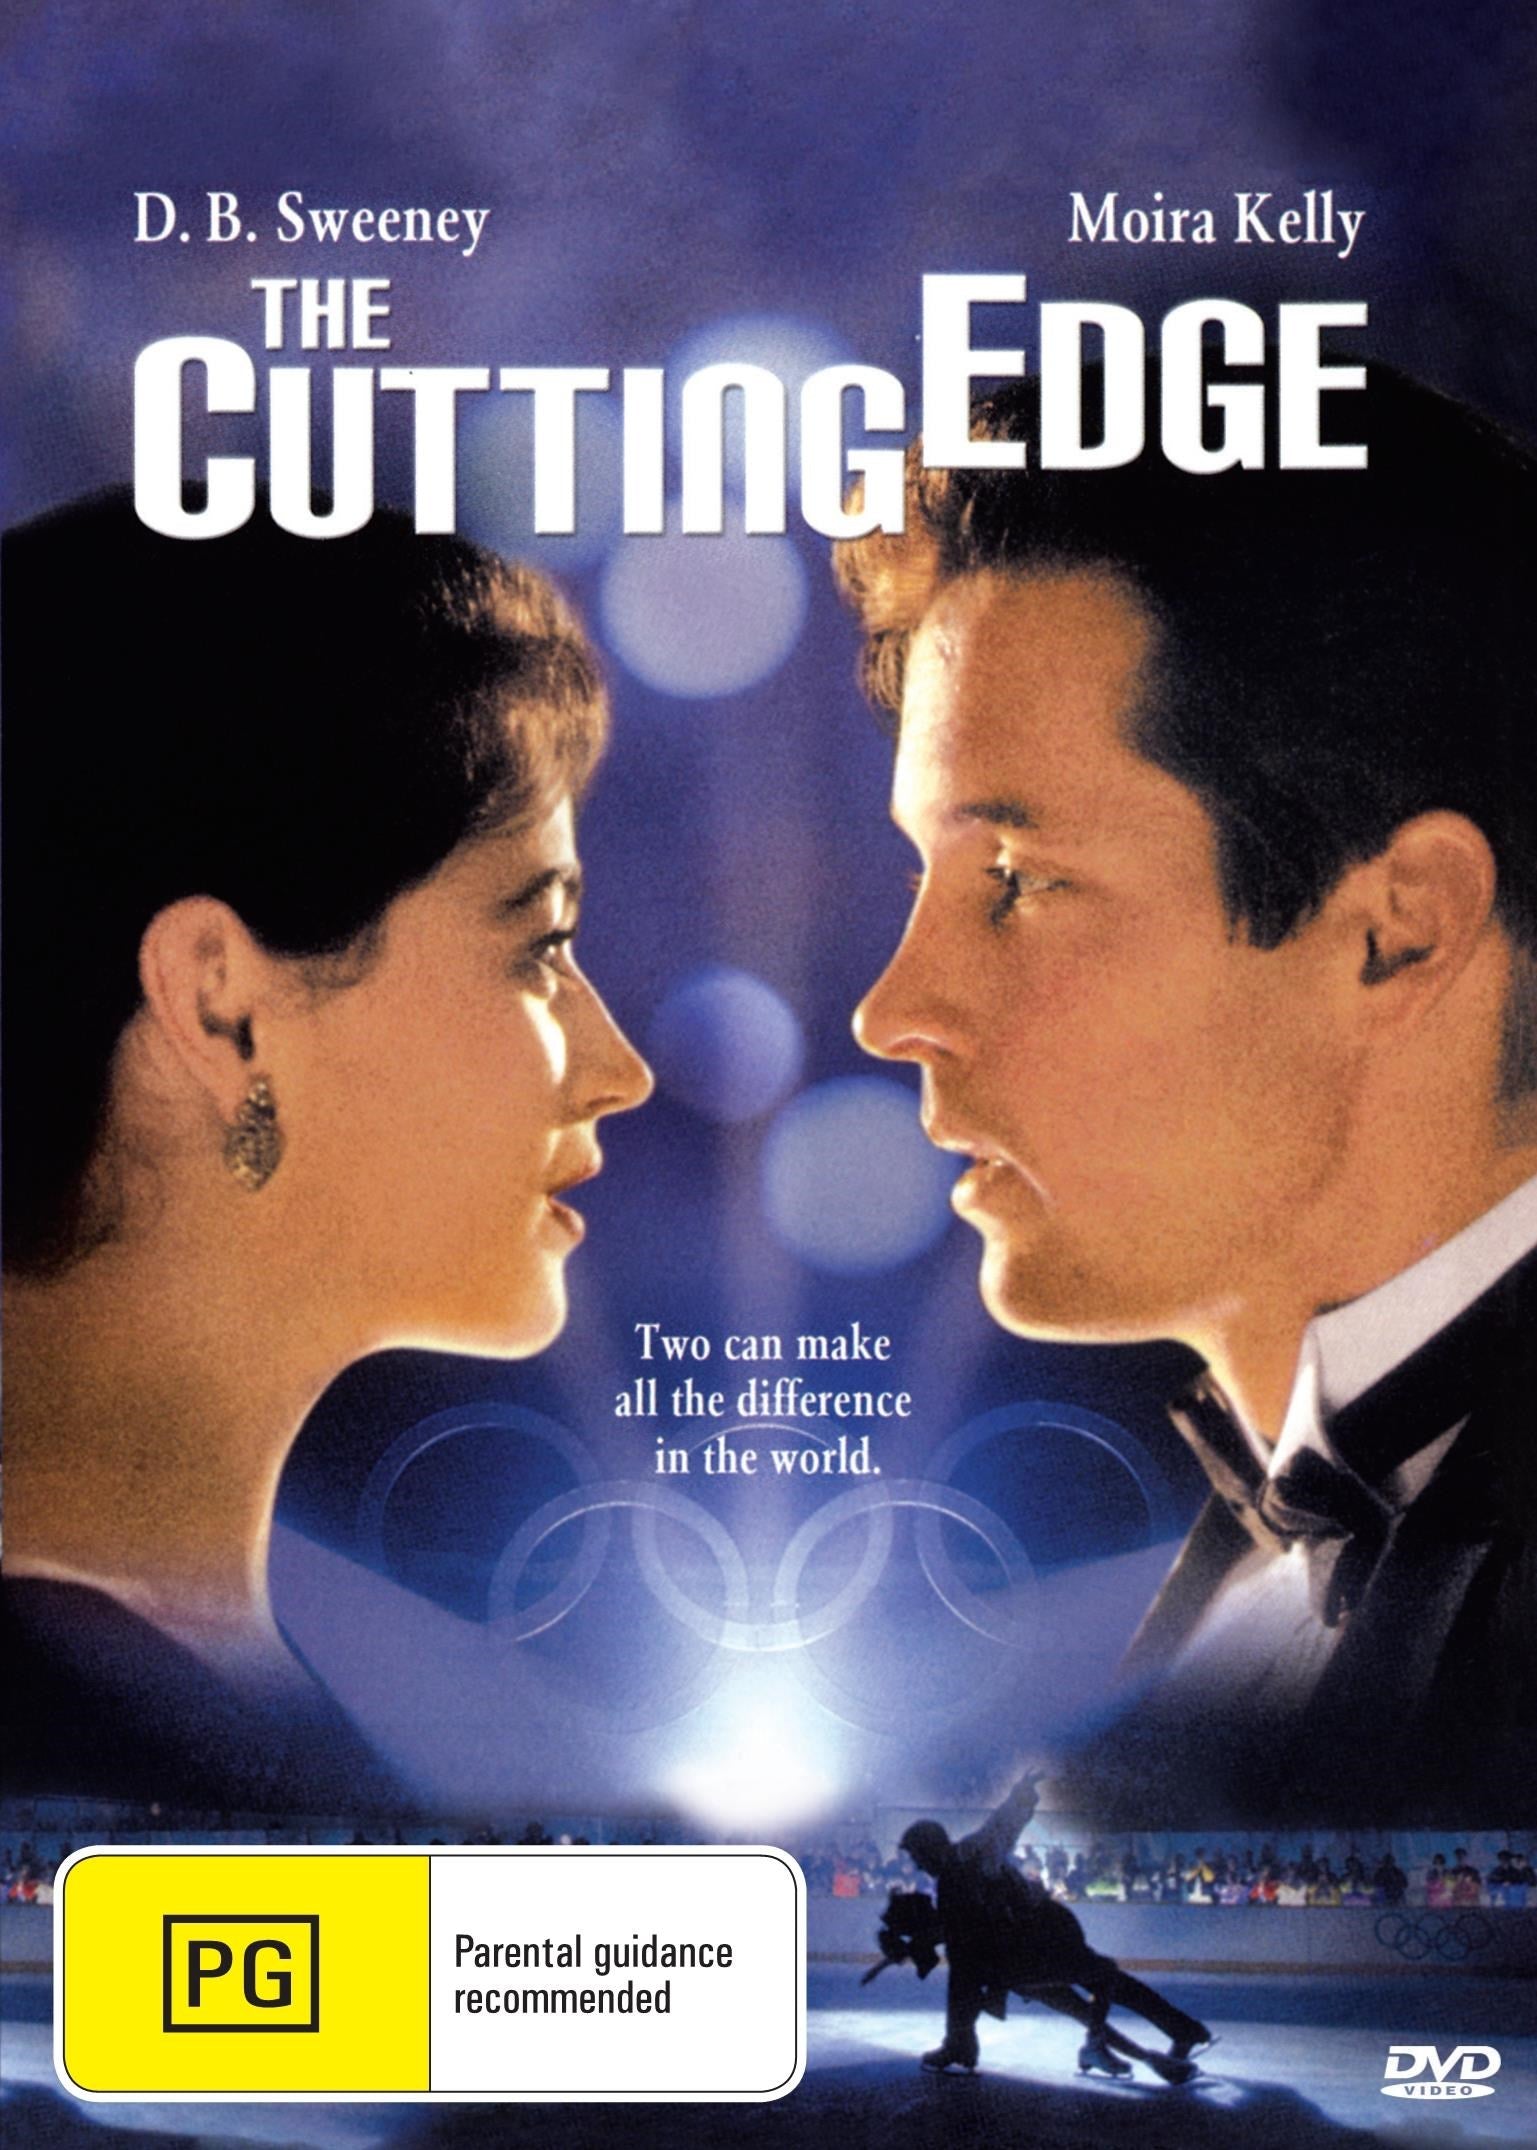 The Cutting Edge rareandcollectibledvds